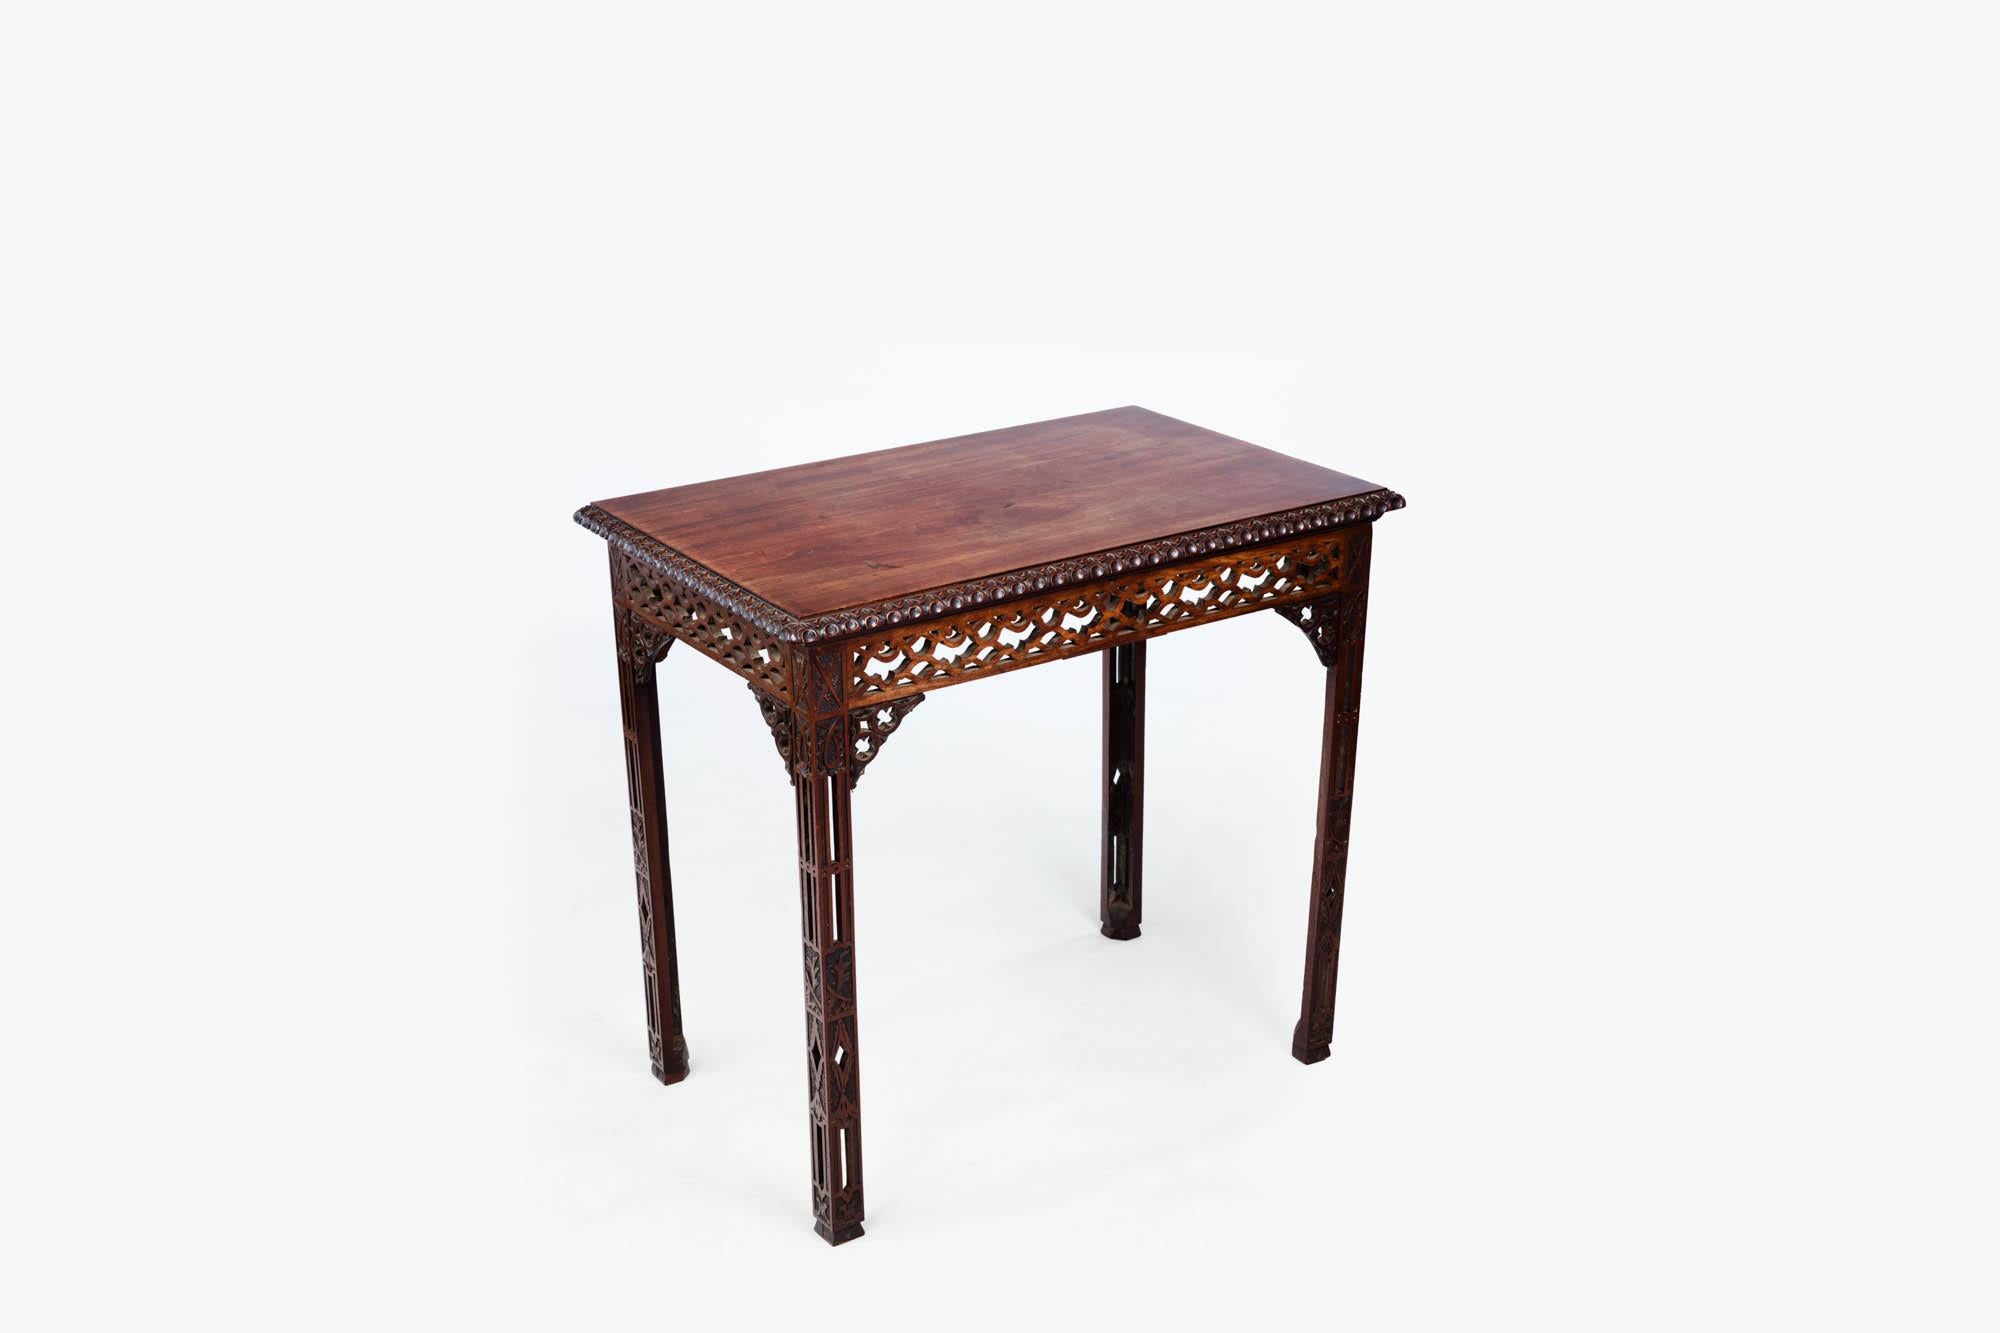 18th Century Chinese Chippendale mahogany silver table with gadrooned moulding to the top edge, open fretwork frieze on all four sides and decorative open fretwork brackets. The piece is raised on four square legs with further Chinese-style applied